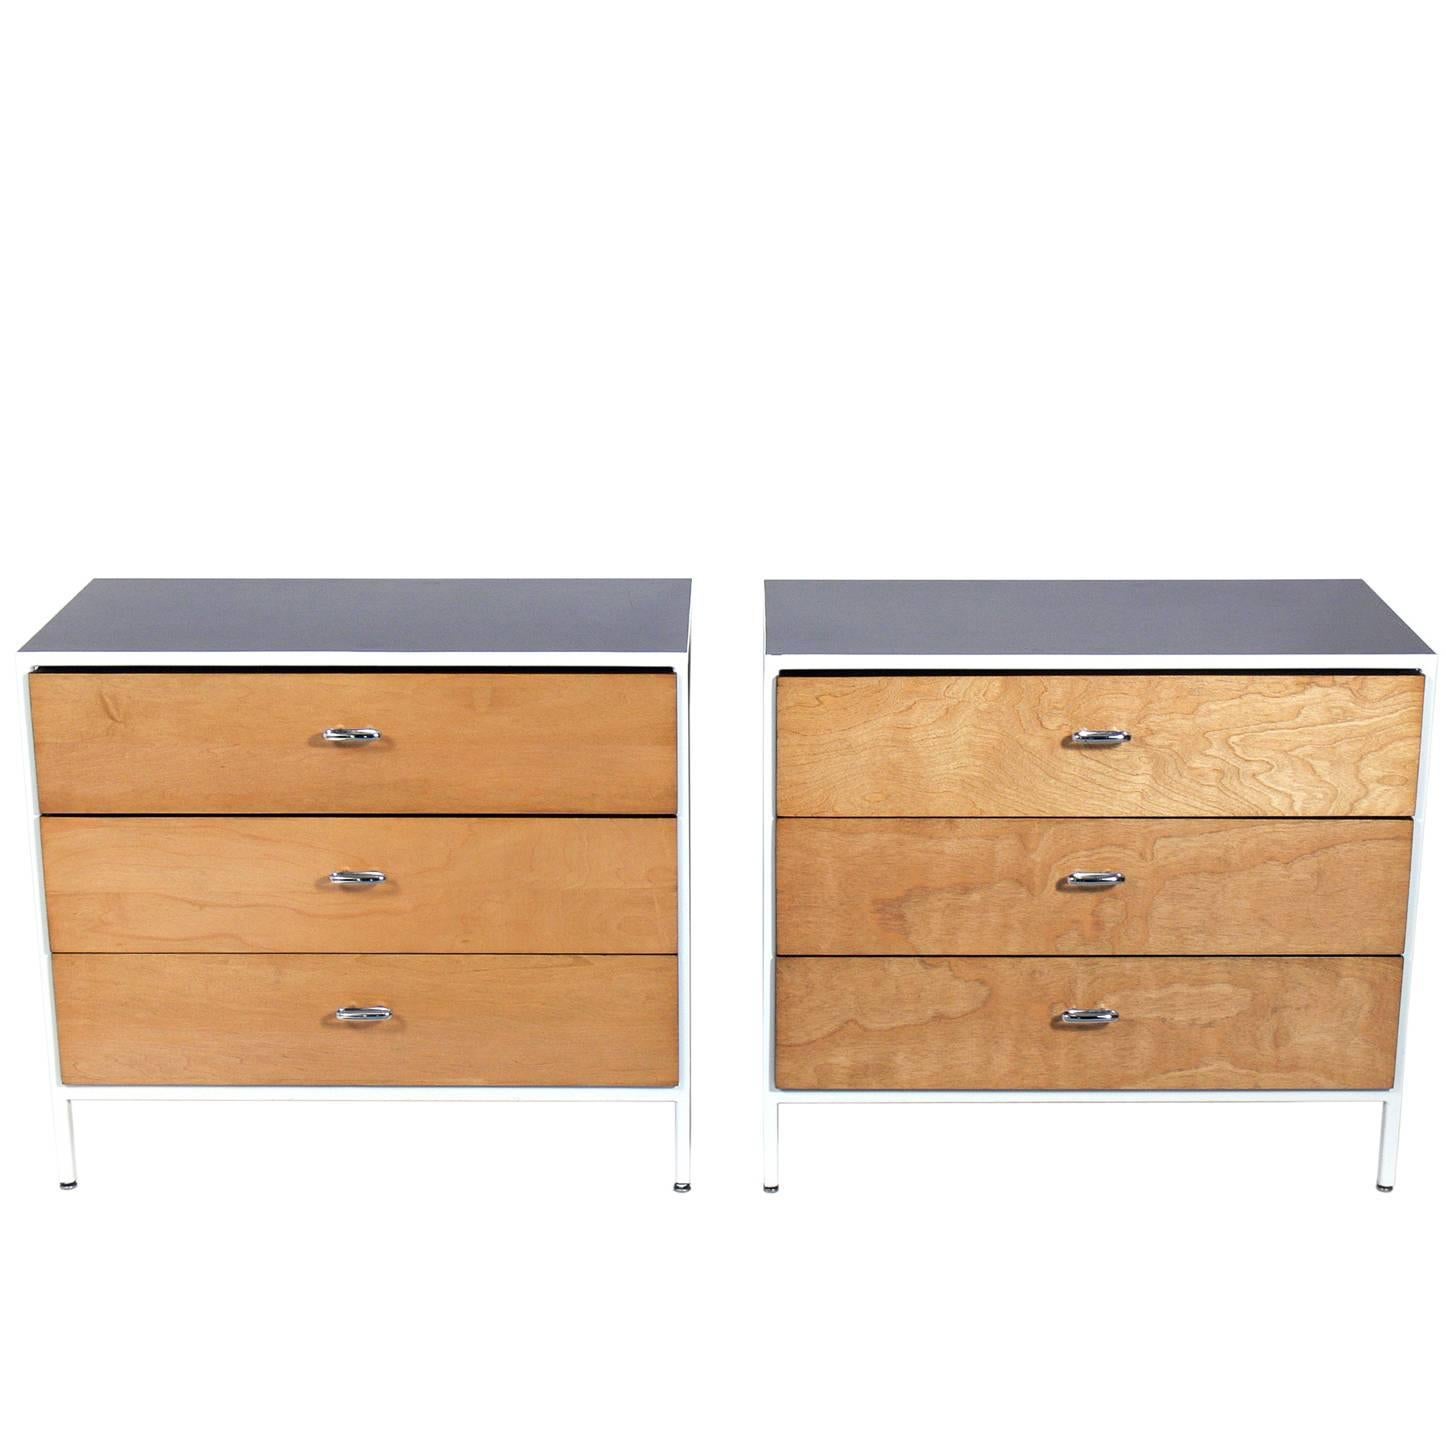 Pair of Modern Chests Designed by George Nelson for Herman Miller